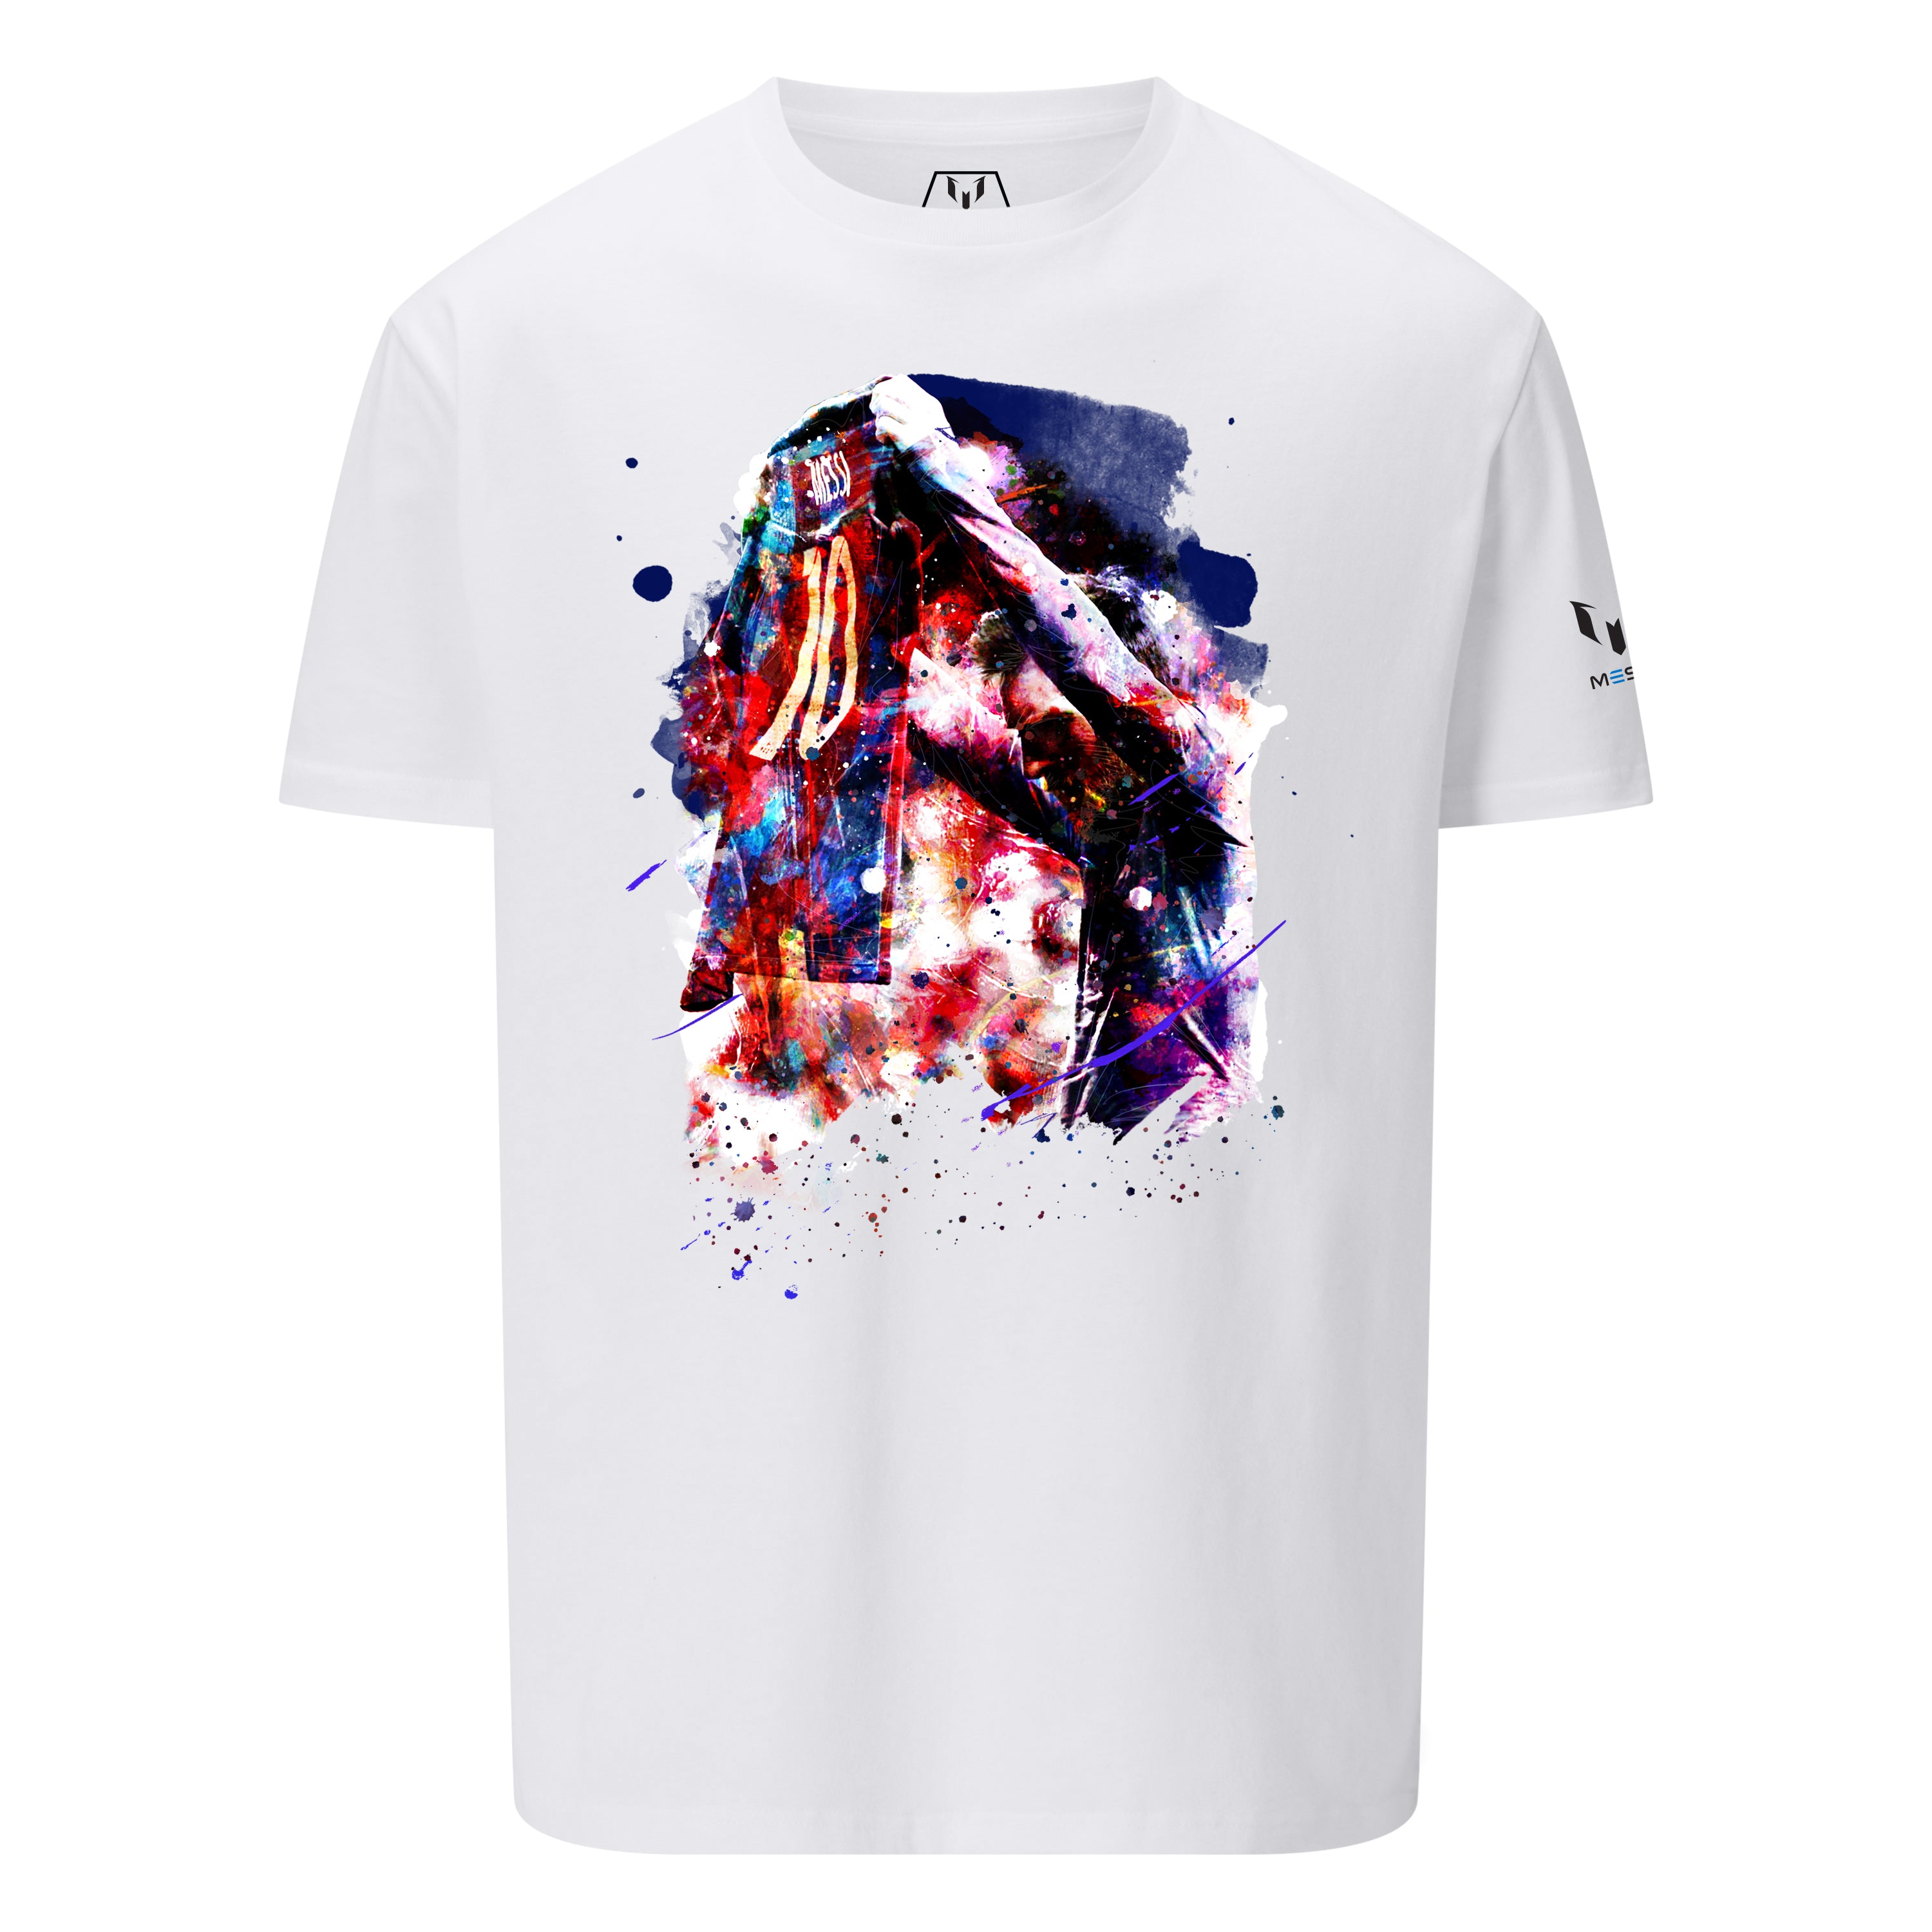 Shop Graphic T-Shirts Store | The Messi at The Store Messi